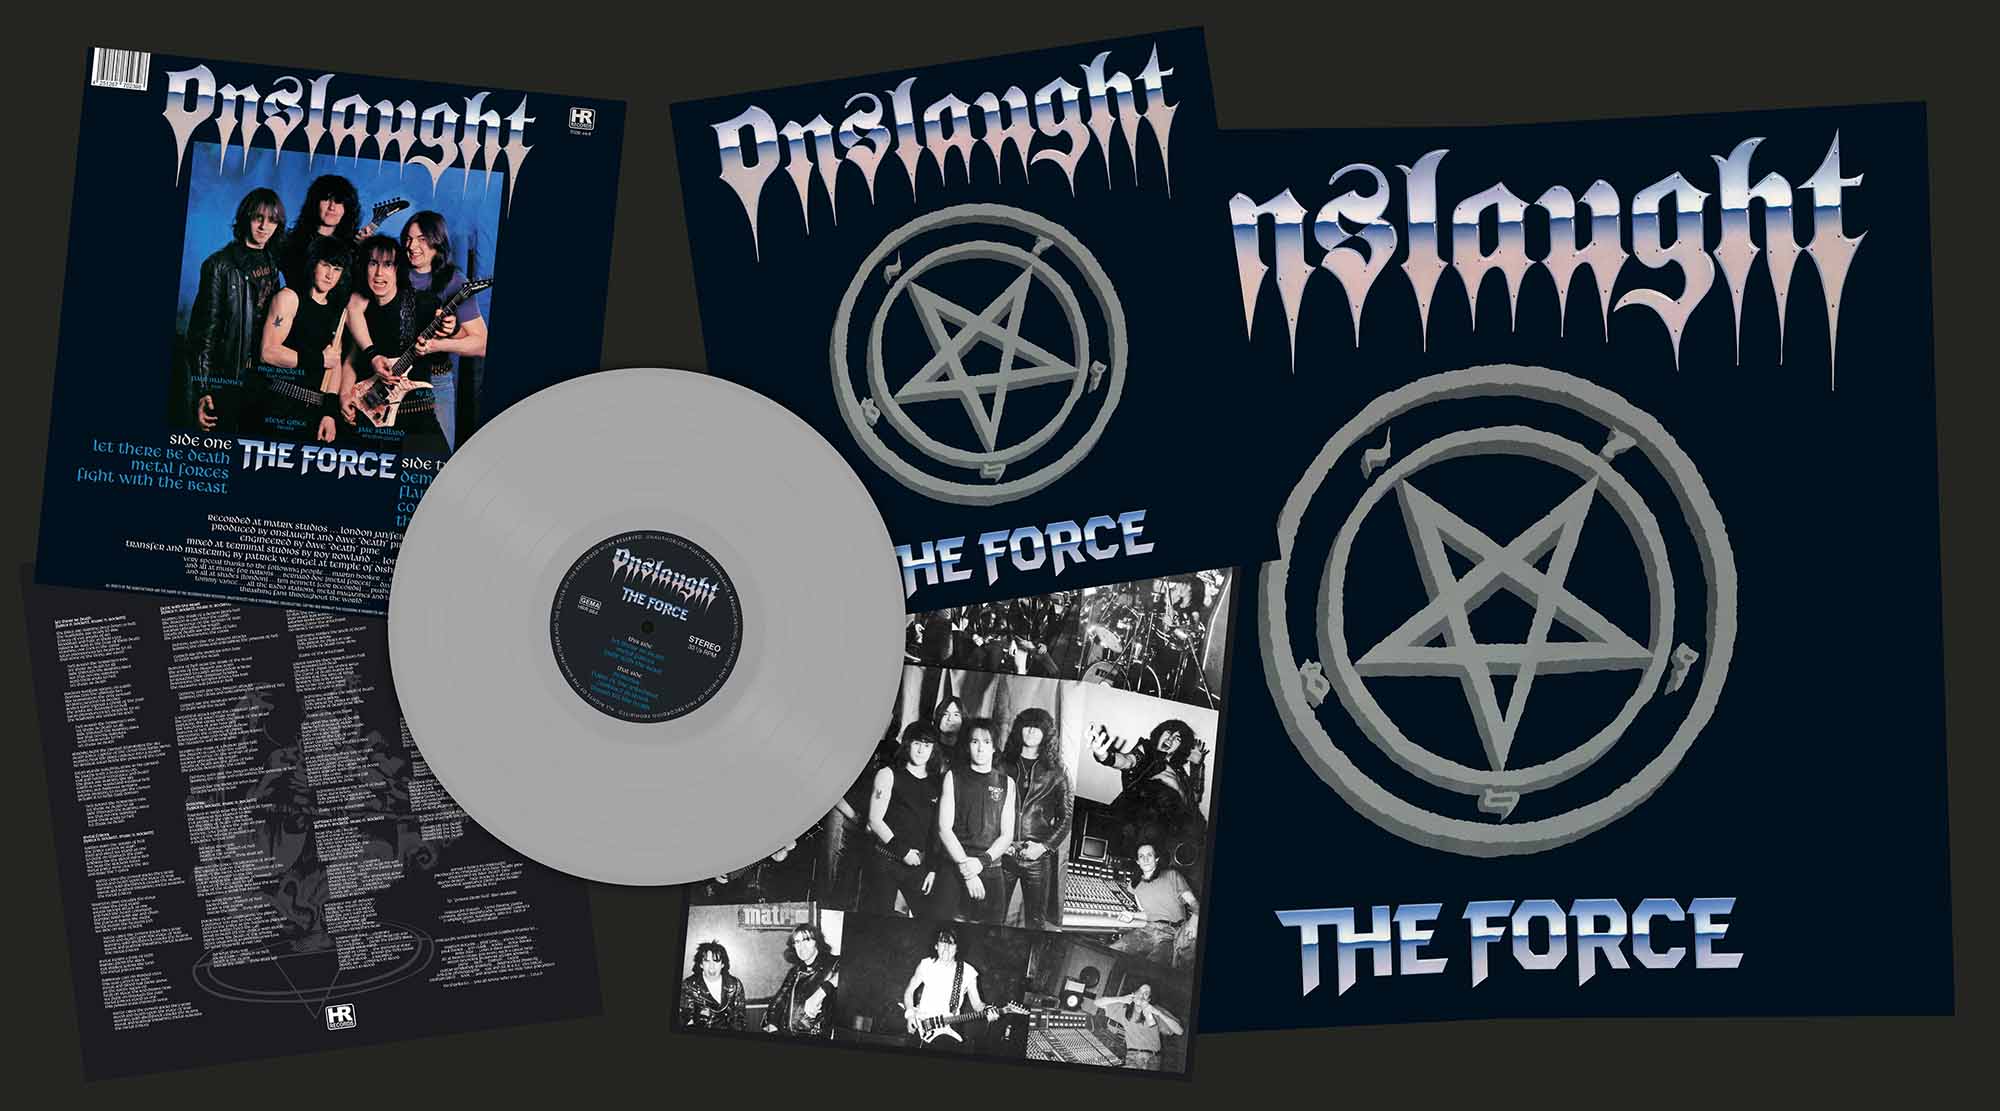 ONSLAUGHT - The Force  LP